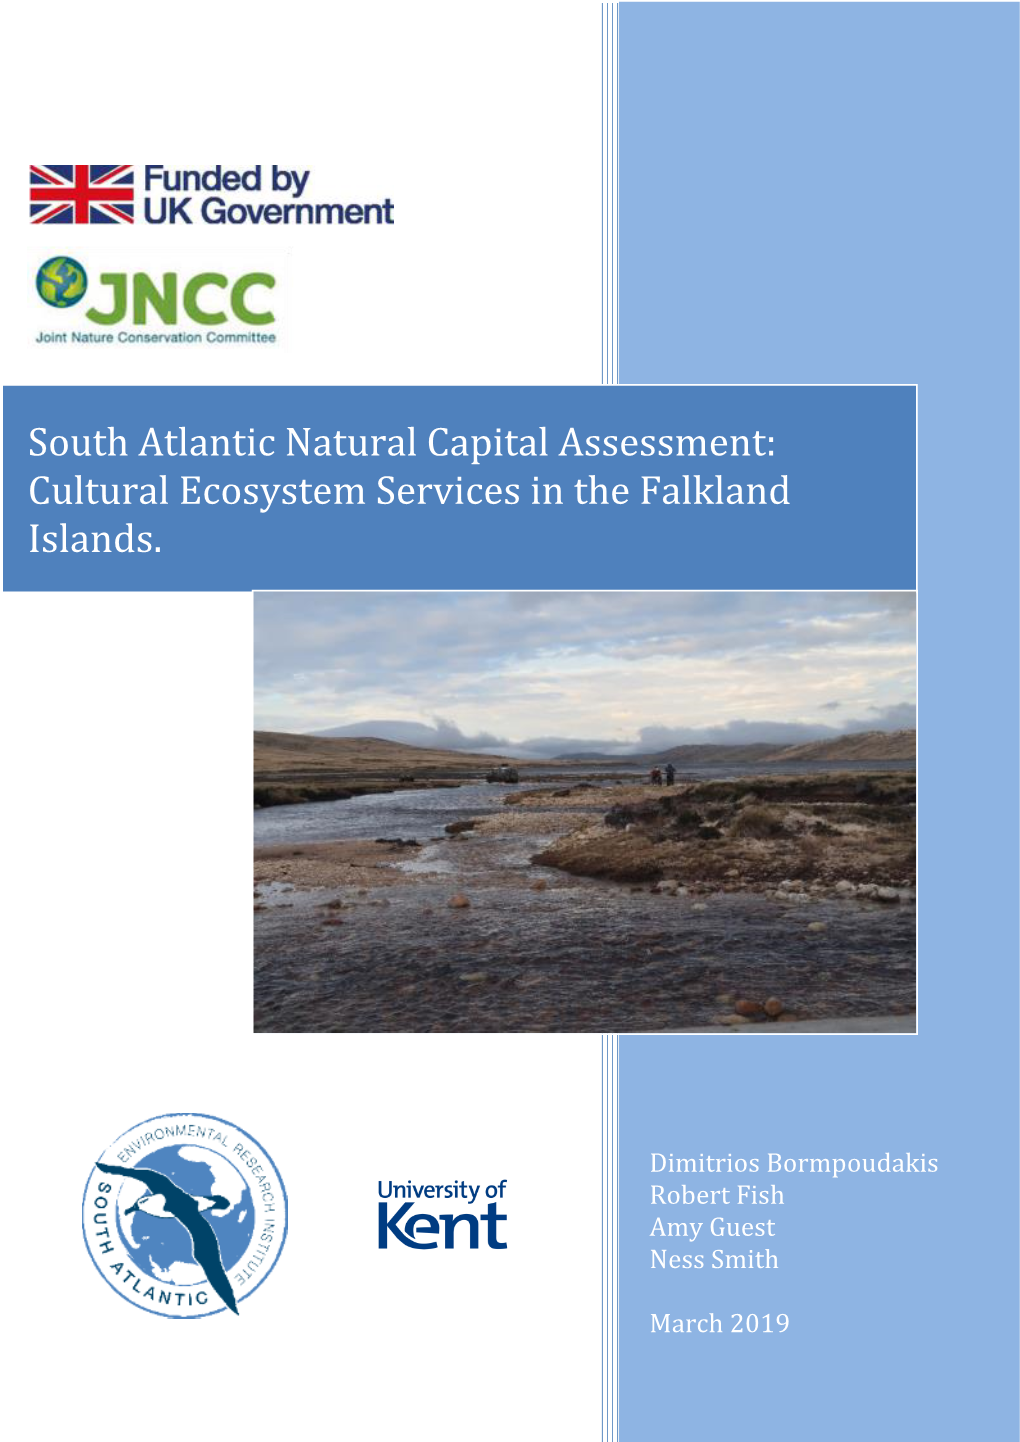 Cultural Ecosystem Services in the Falkland Islands